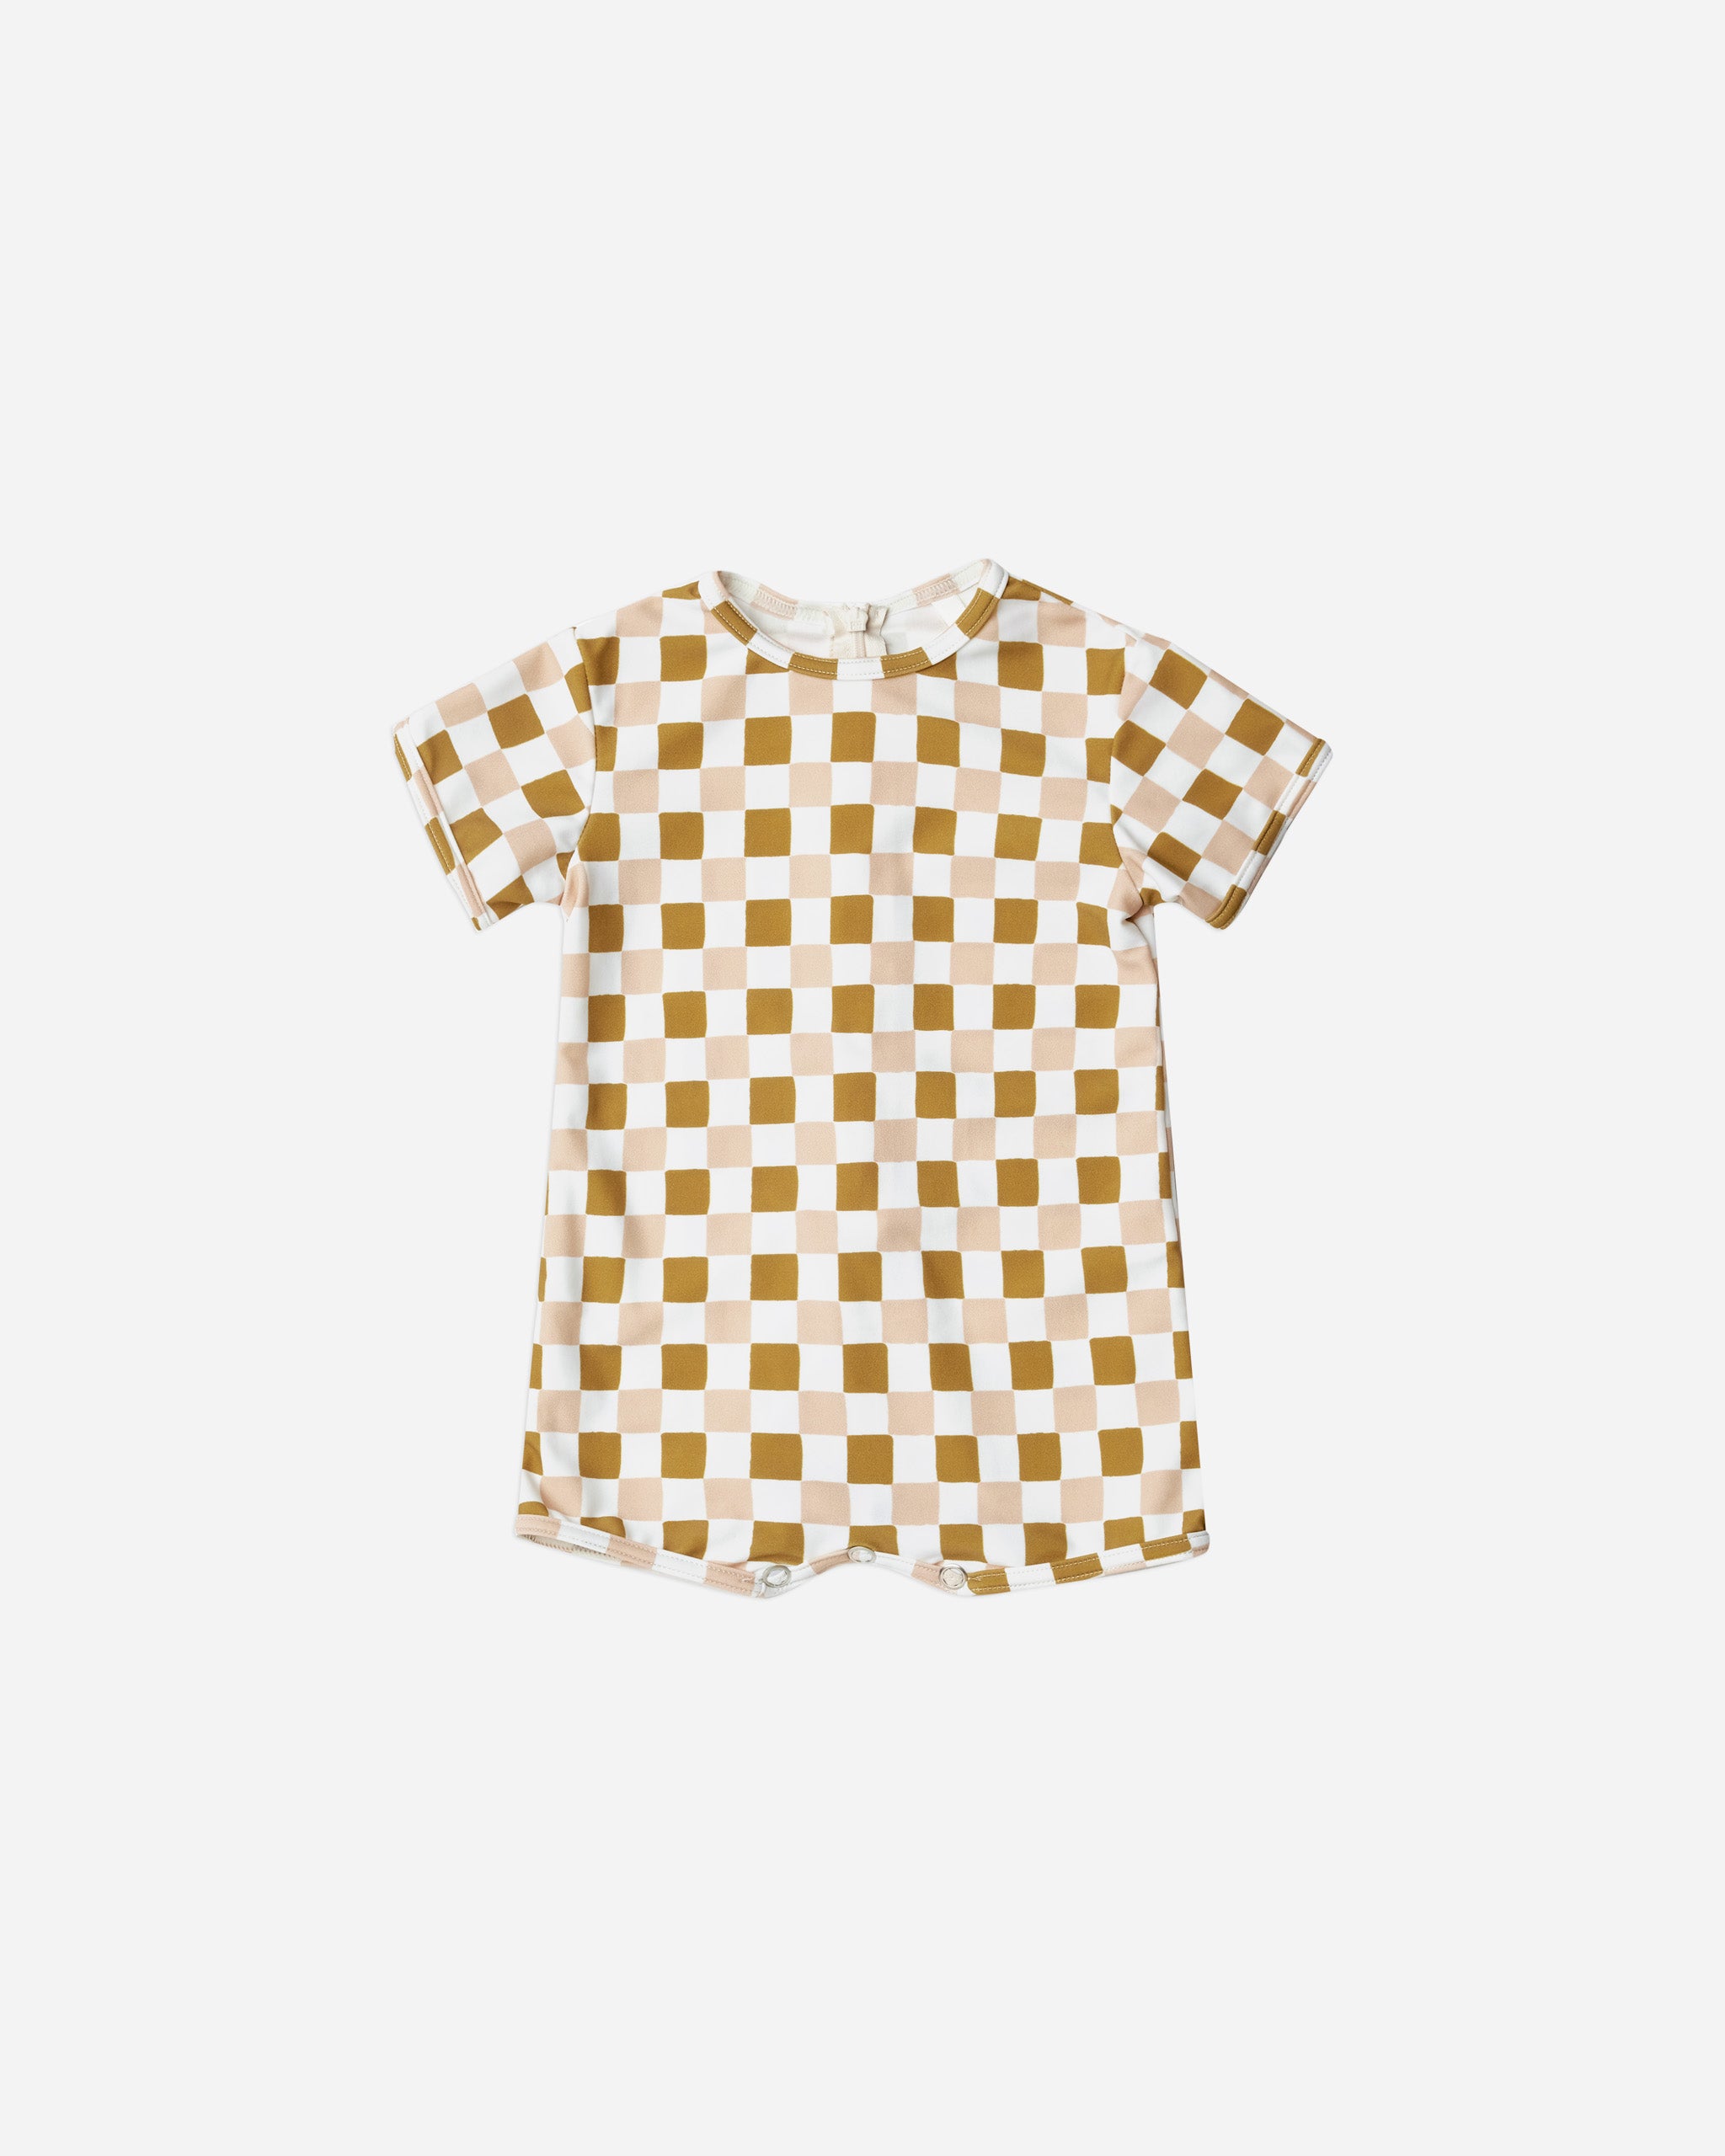 shorty one-piece || retro check - Rylee + Cru | Kids Clothes | Trendy Baby Clothes | Modern Infant Outfits |